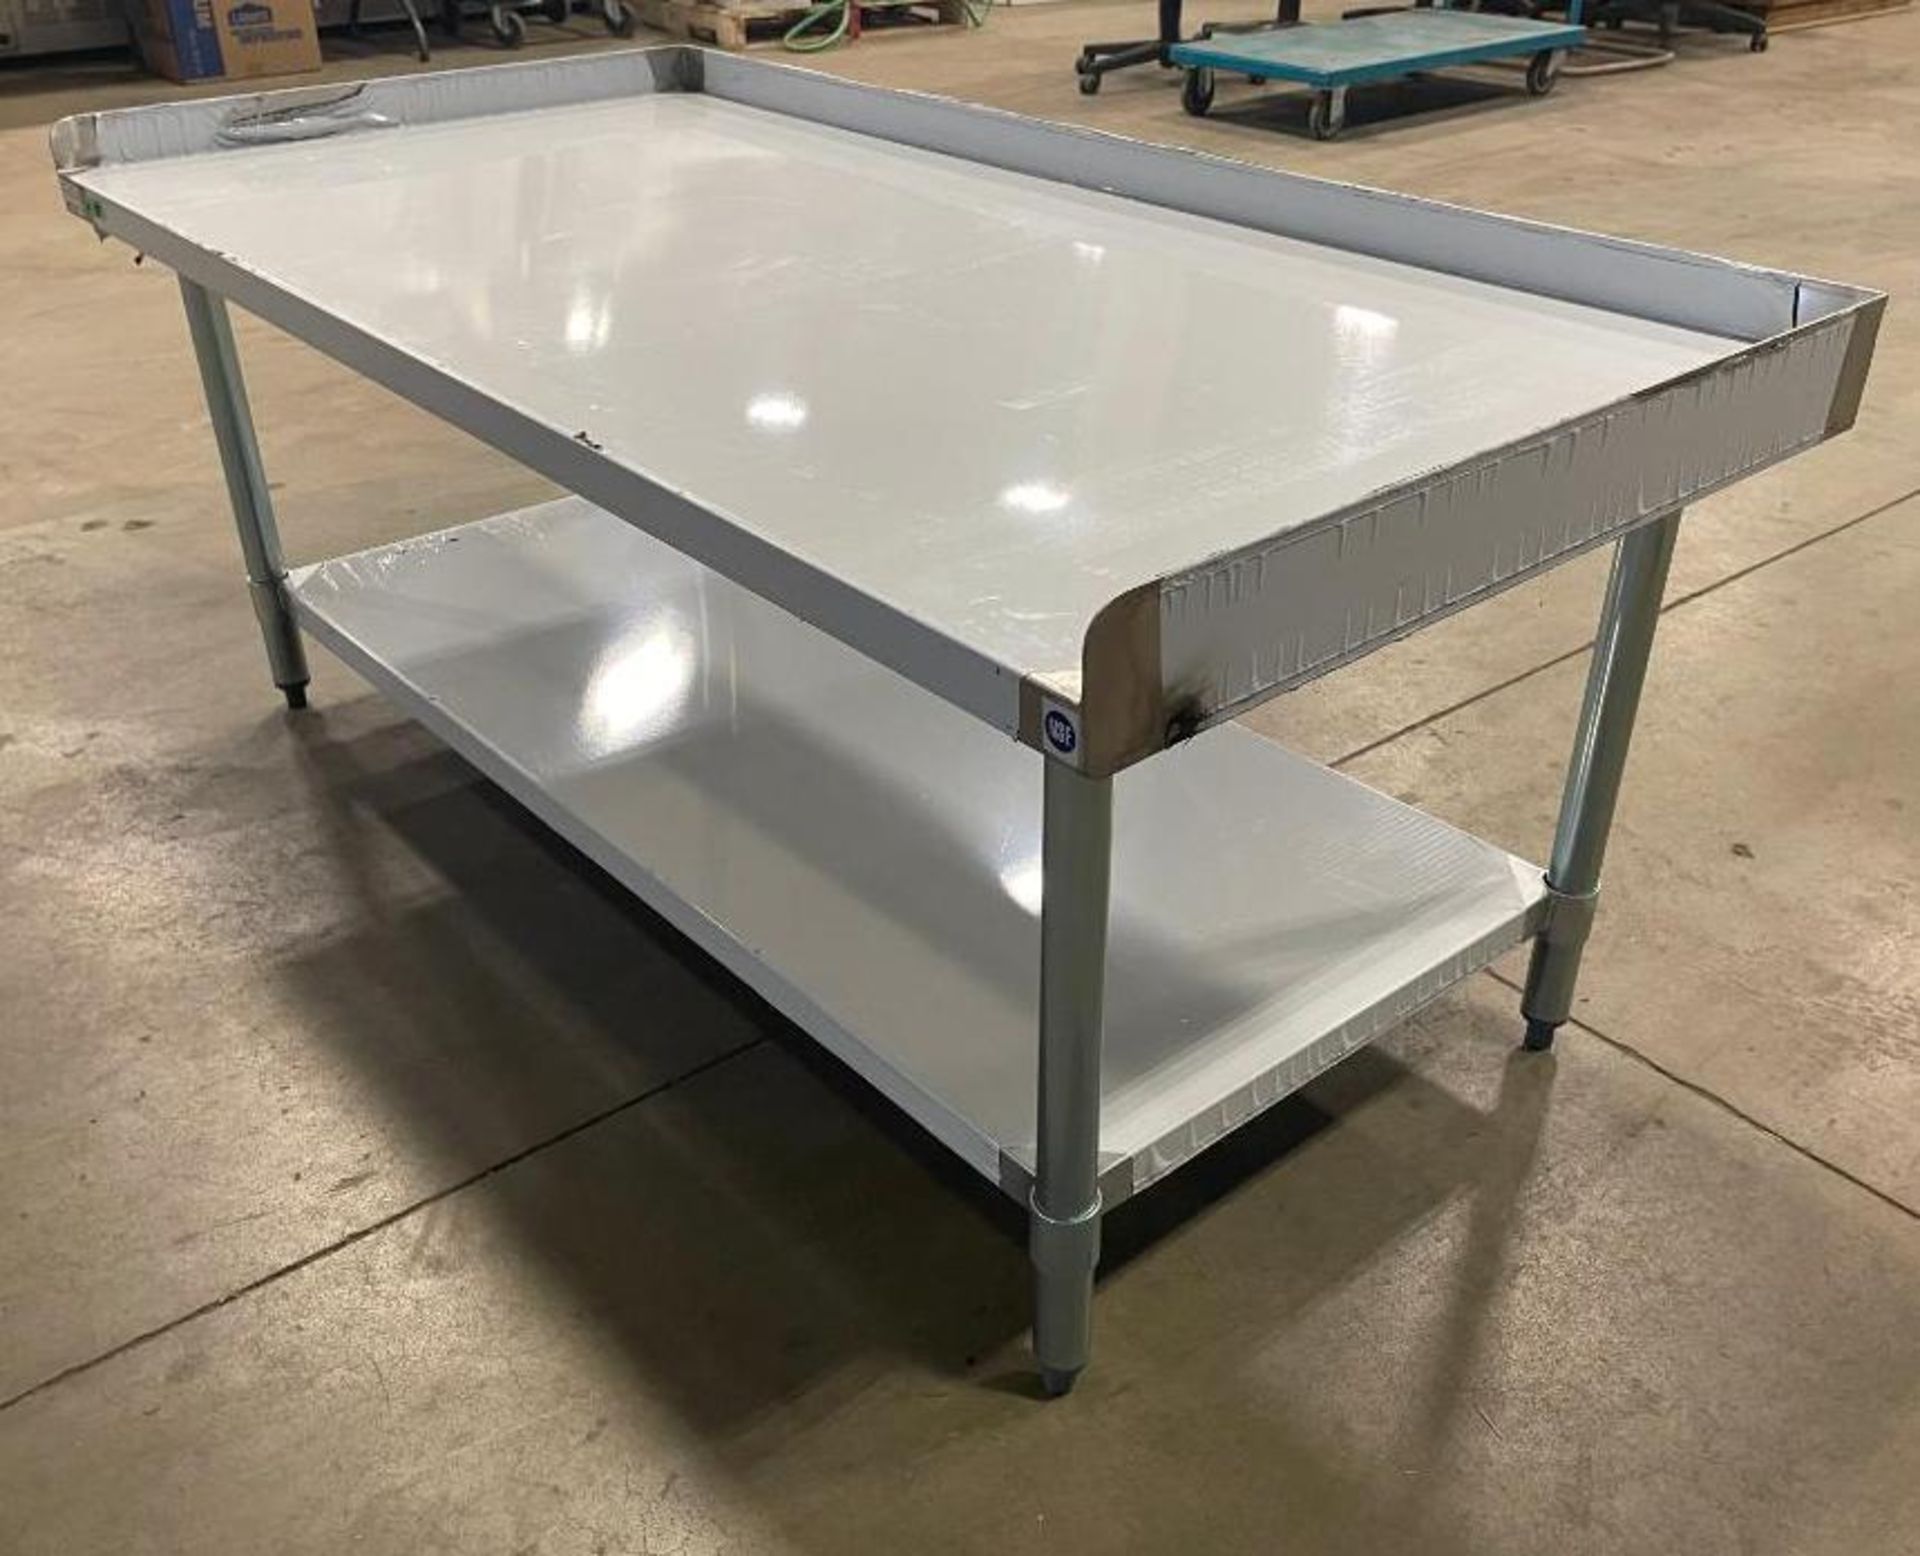 CHEF'S MATE 30" X 60" STAINLESS STEEL EQUIPMENT STAND - NEW - Image 5 of 13